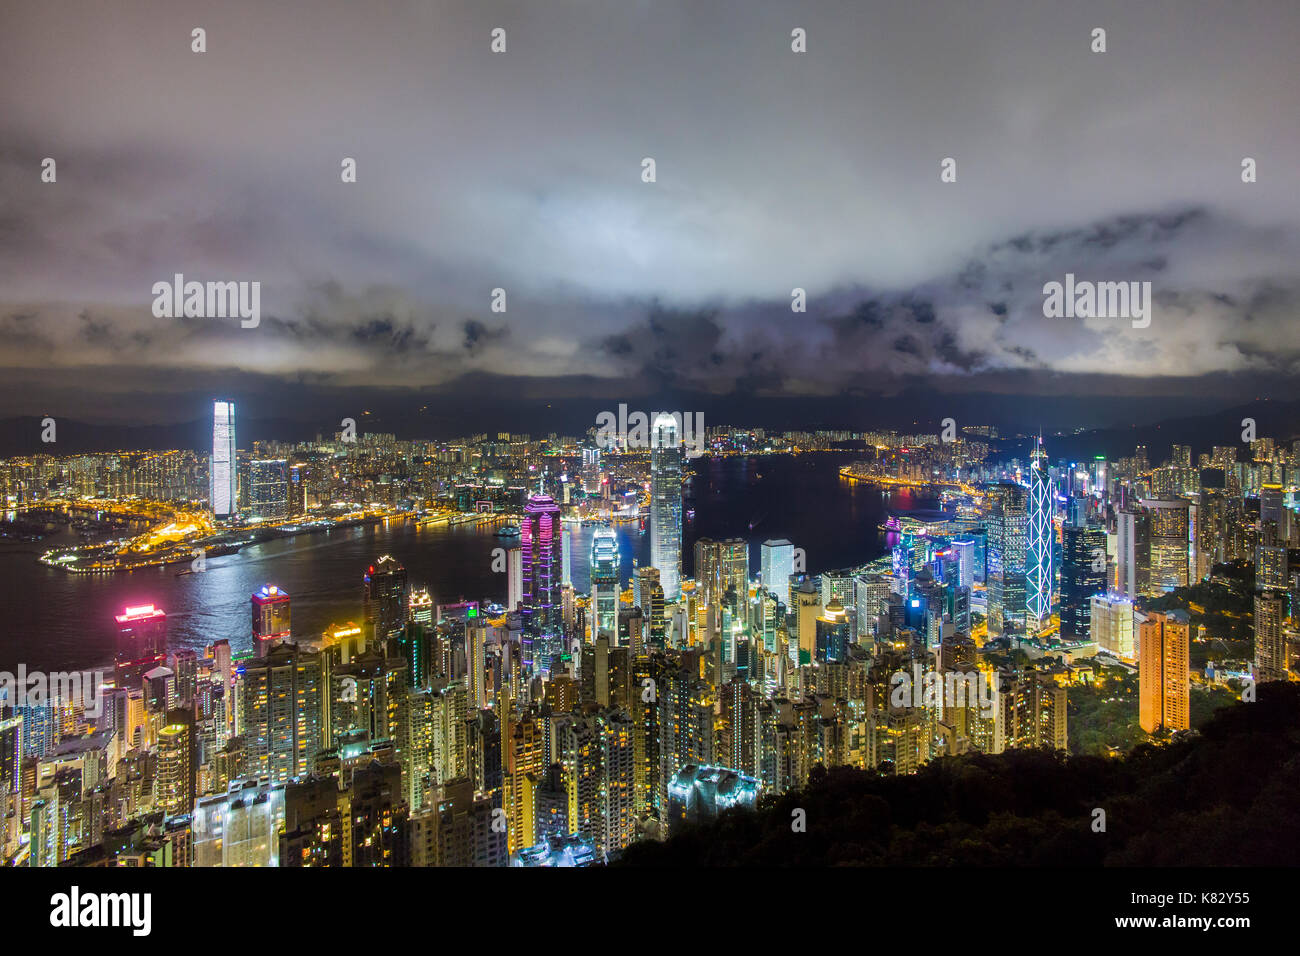 City skyline and Victoria Harbour viewed from Victoria Peak, Hong Kong, China Stock Photo